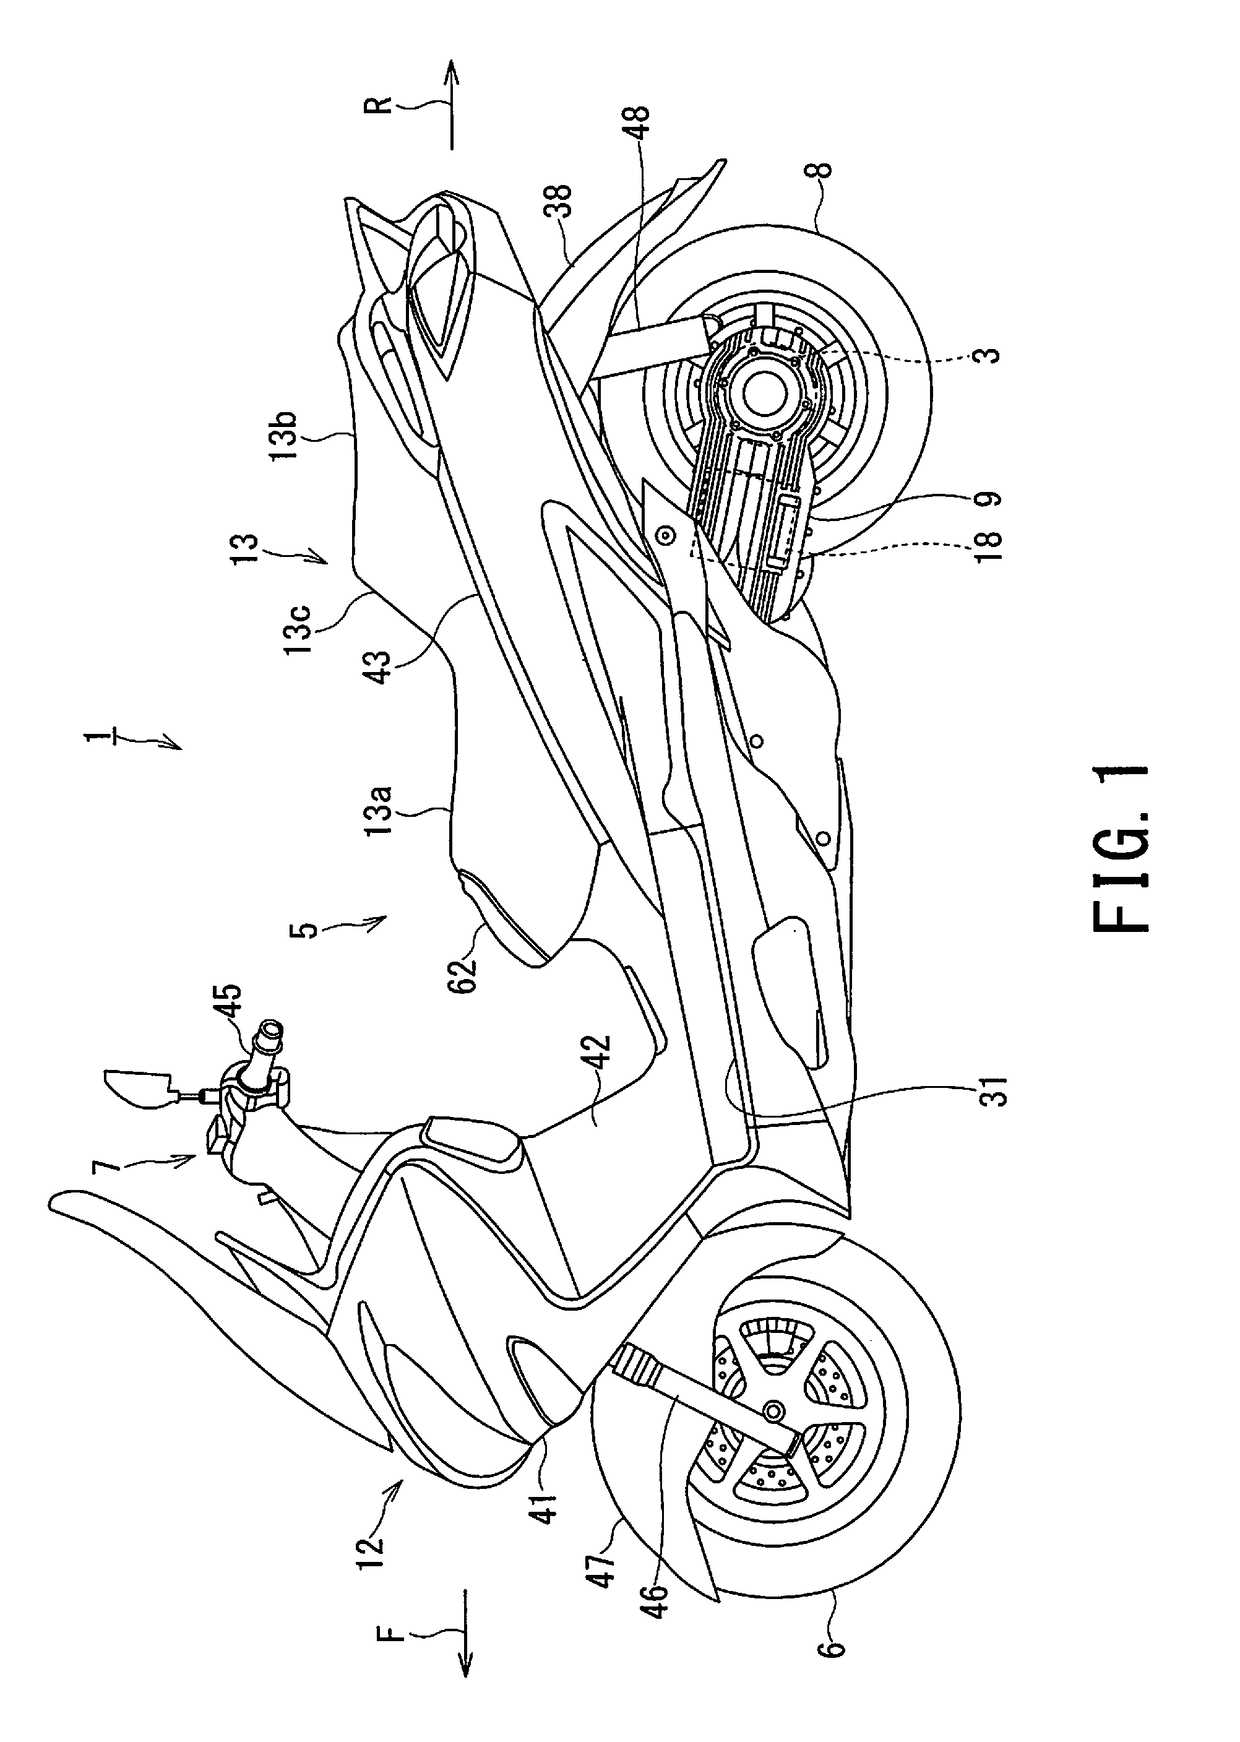 Driving apparatus of electric vehicle and method for assembling driving apparatus of electric vehicle